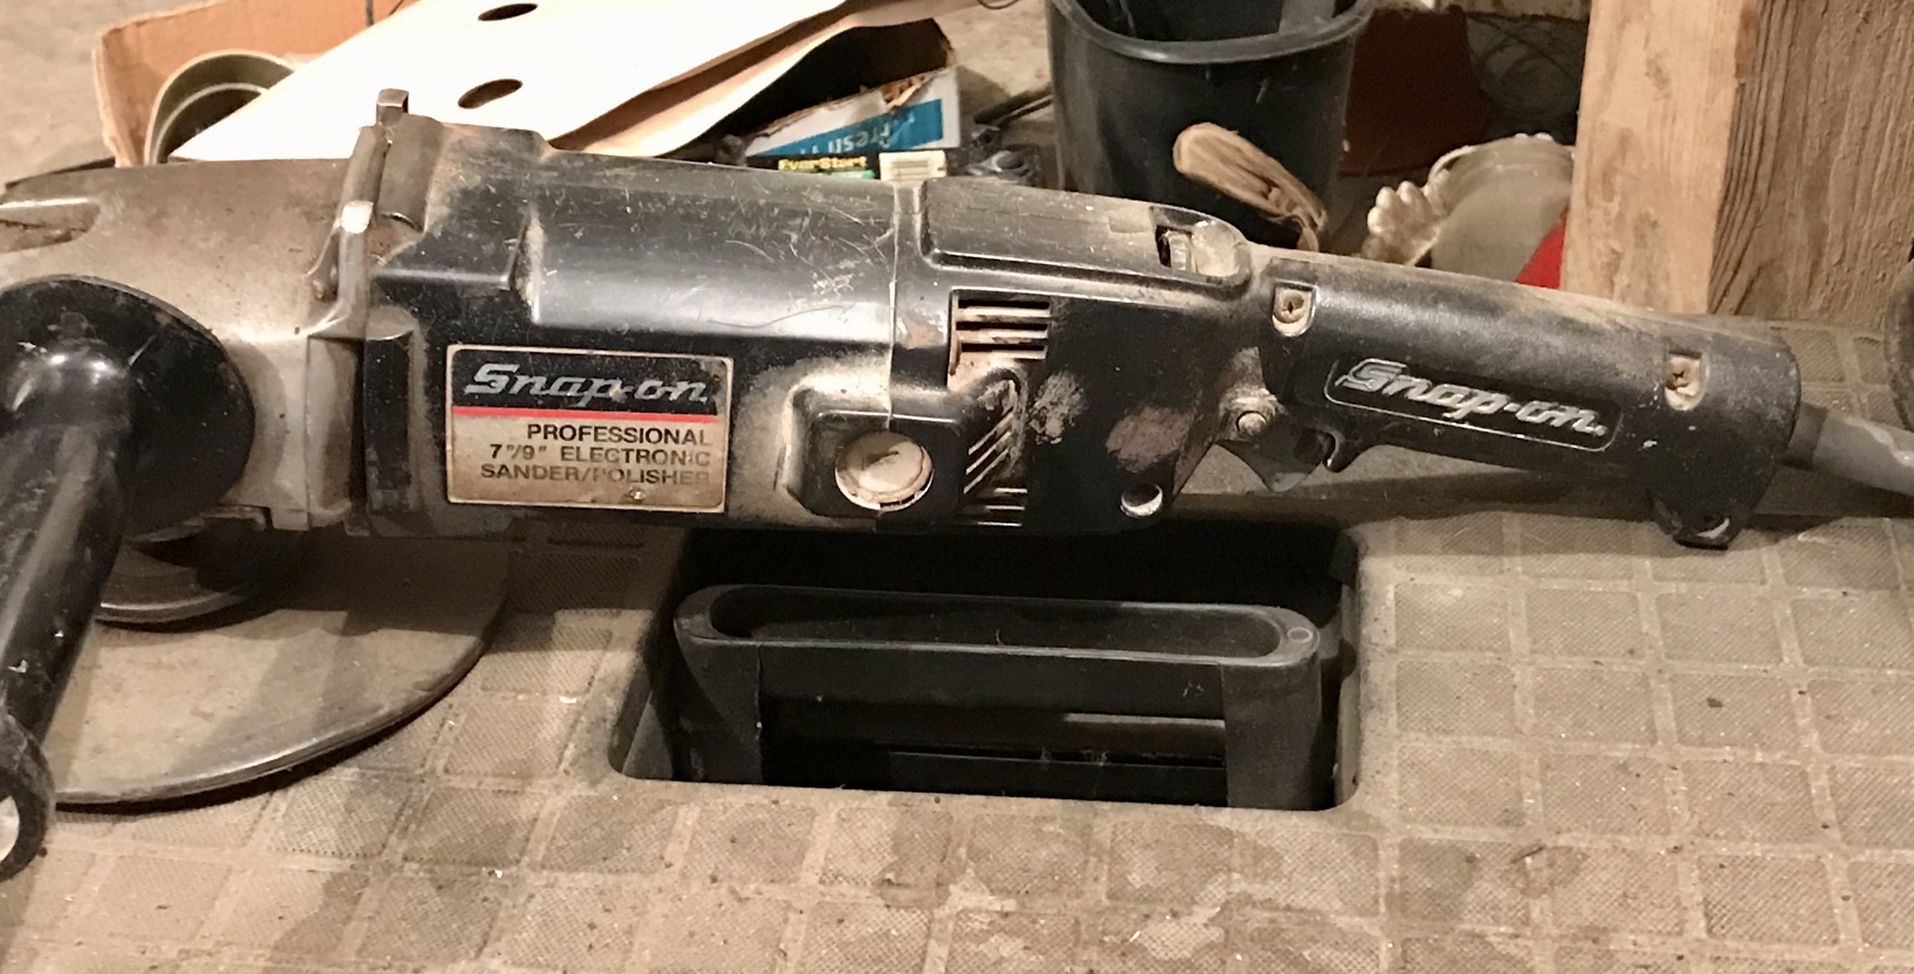 Snap-on Professional Electric Polisher And Sander